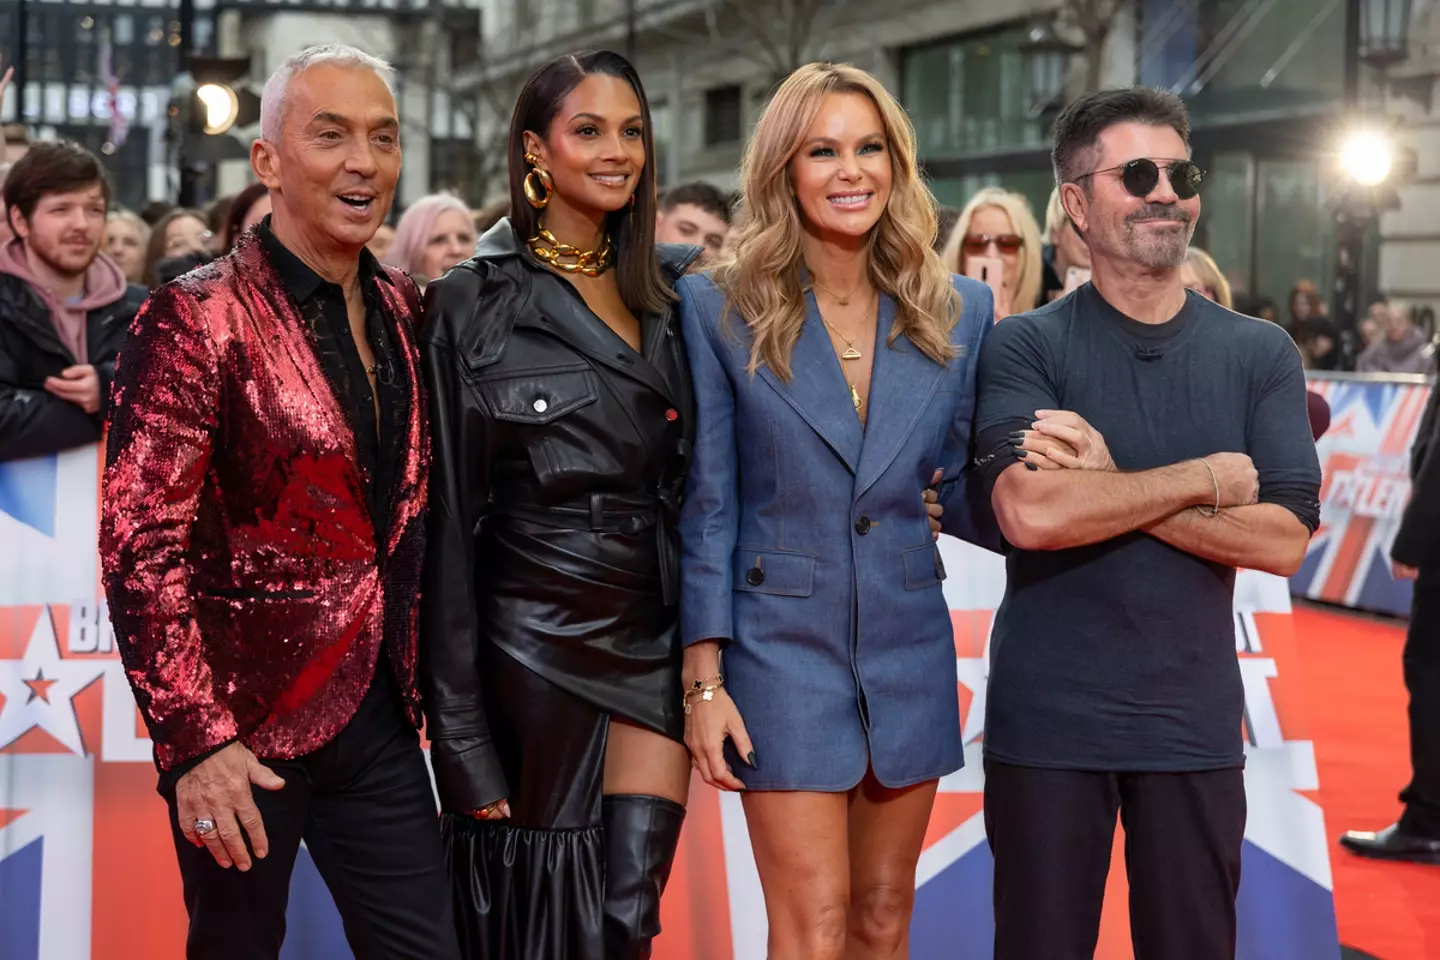 Simon Cowell addressed Holden's fashion choices on BGT. (Jeff Spicer/WireImage/Getty Images)